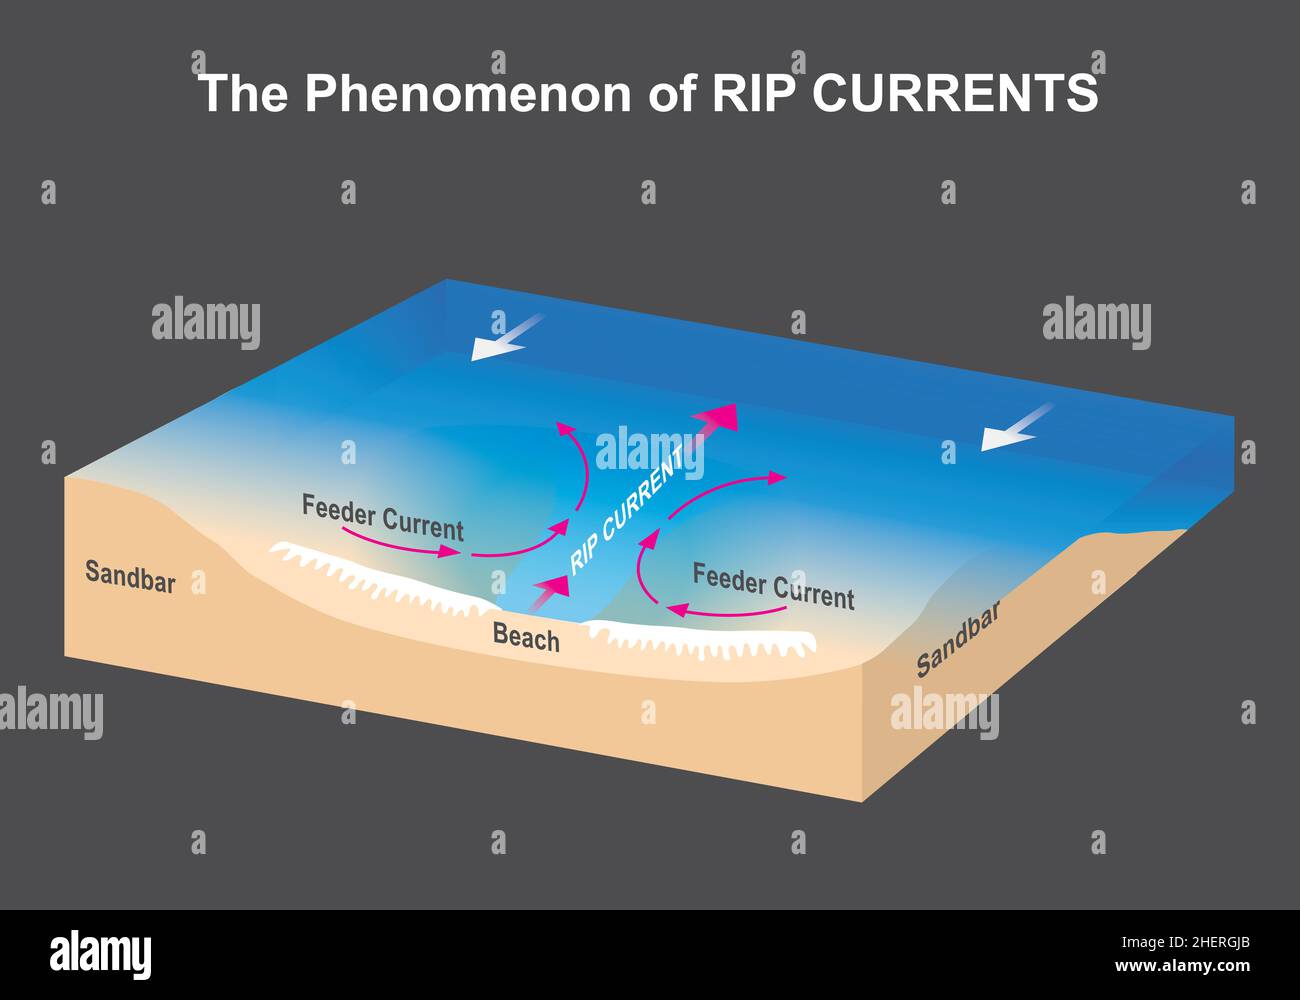 The Phenomenon of RIP CURRENTS. Sea and beach figure for explain The dangerous phenomenal of RIP CURRENTS. Stock Vector